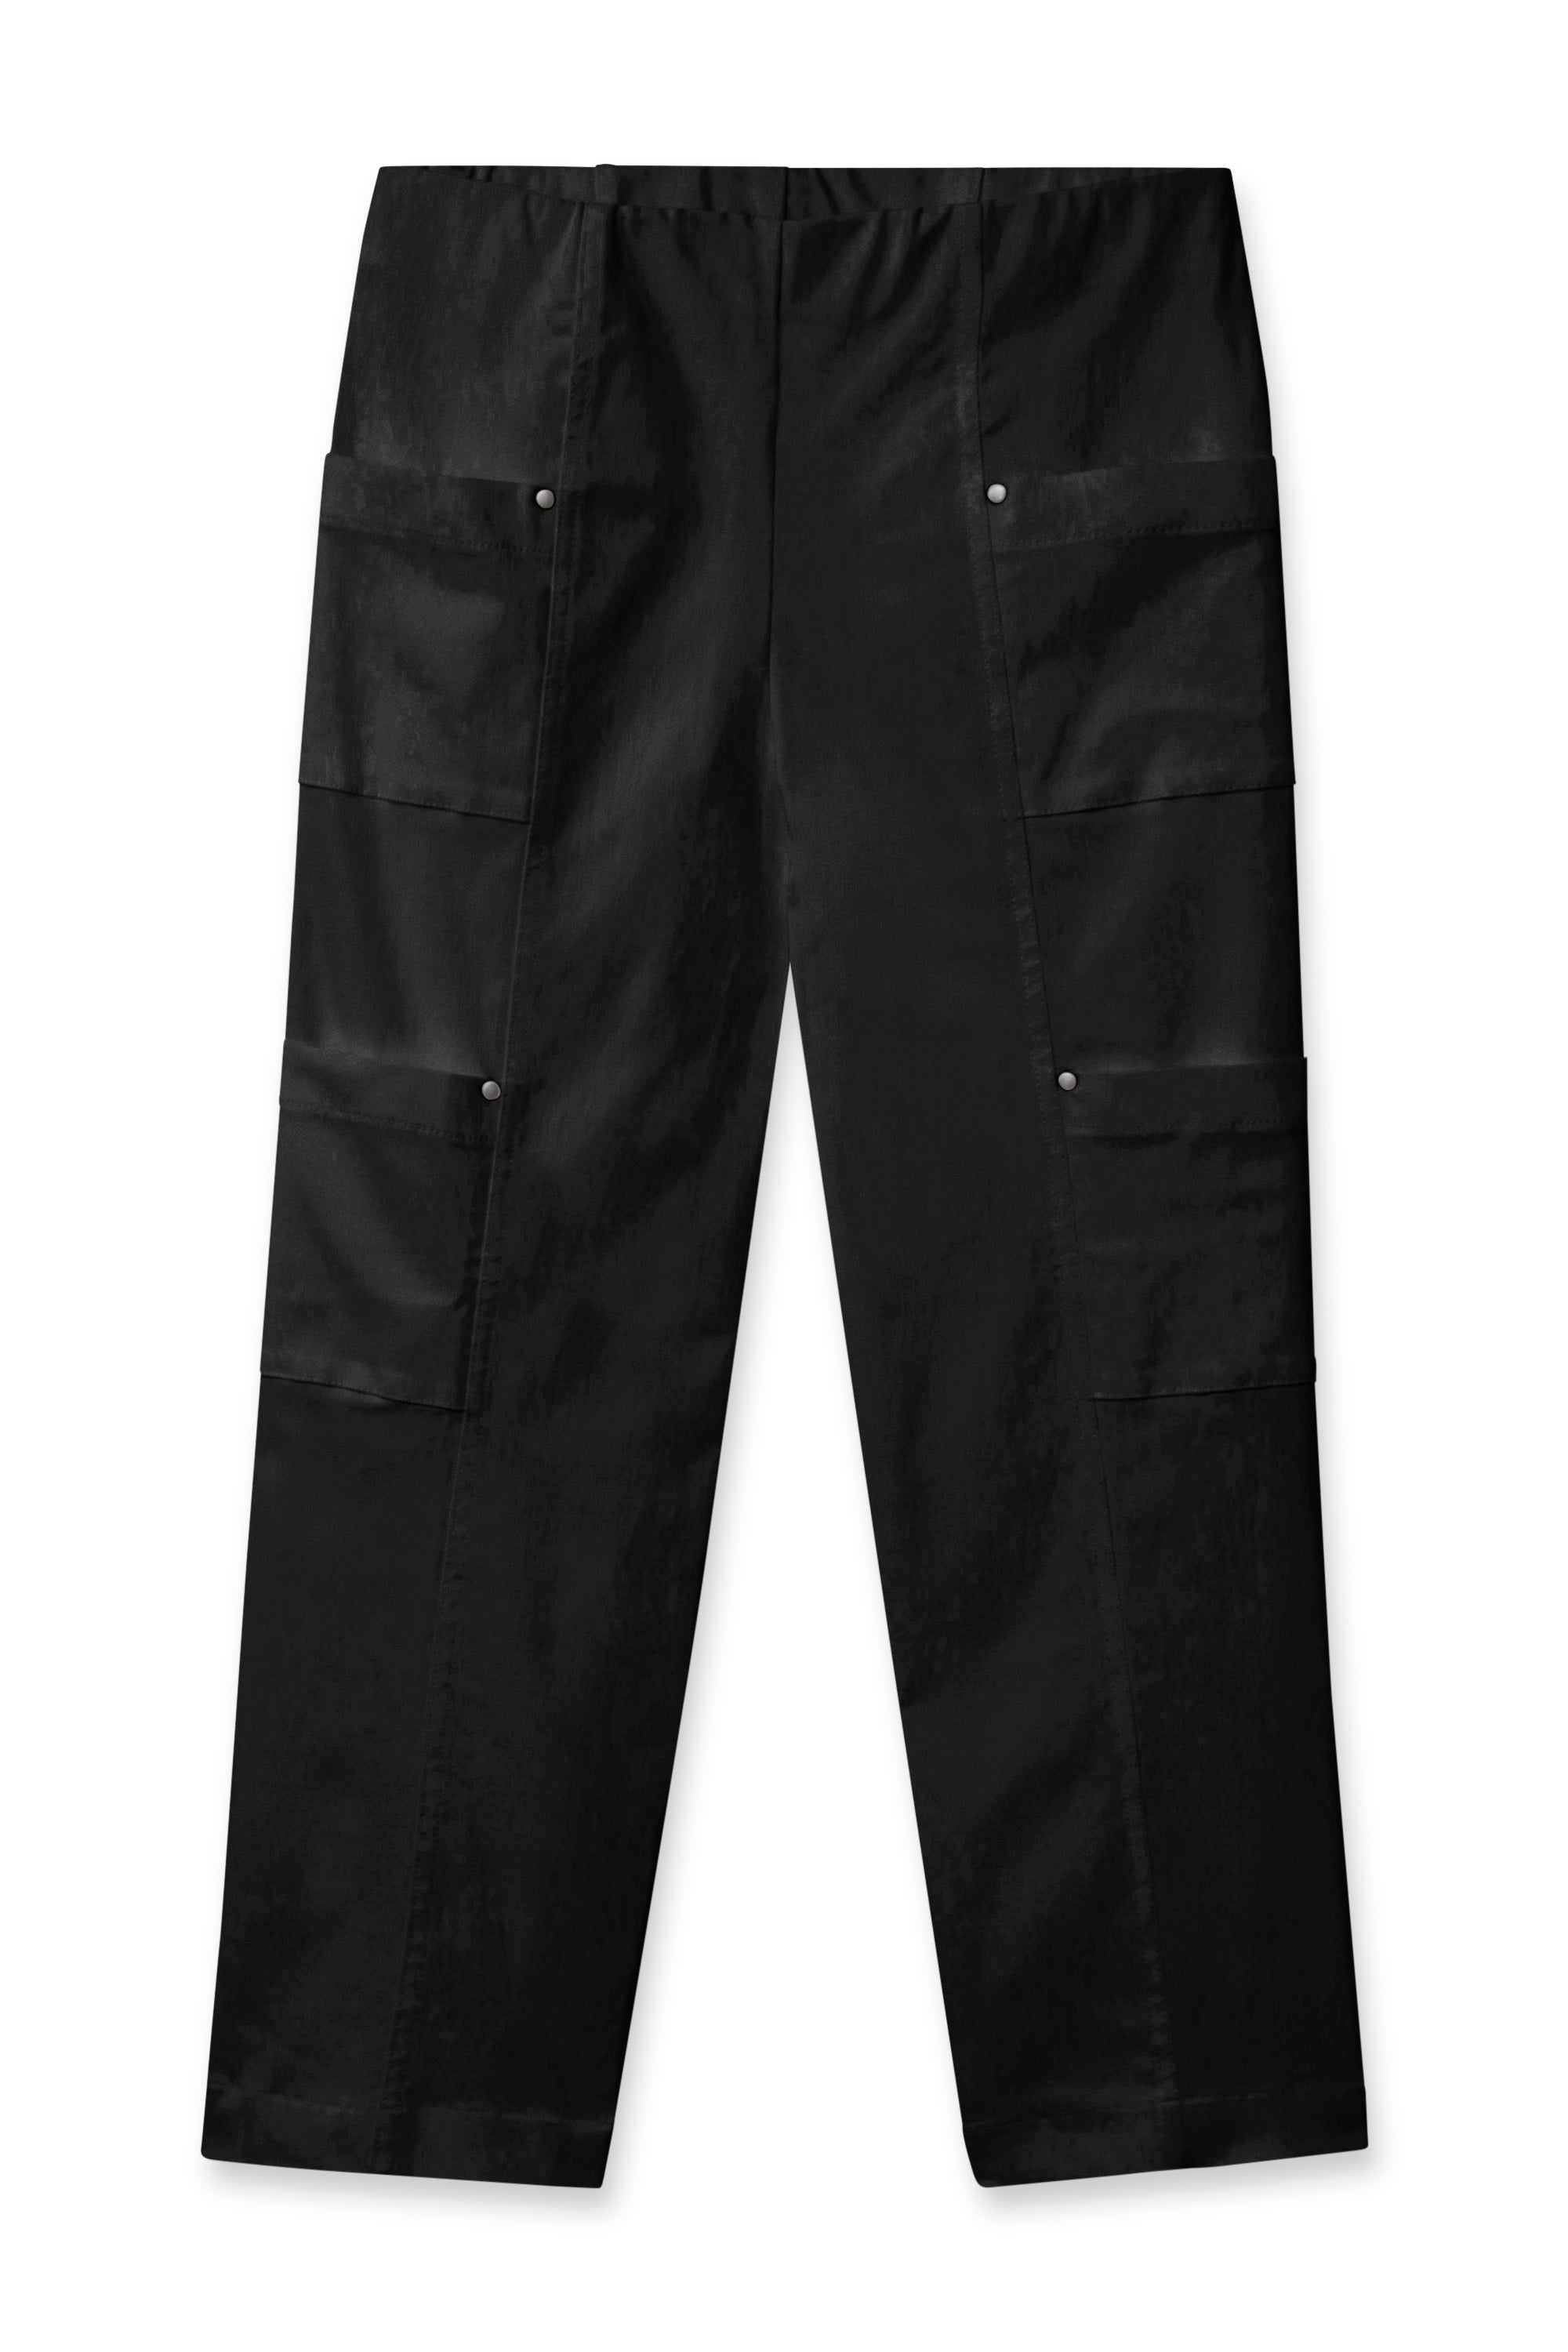 Grommet Cargo Pocket Detailed Control Stretch Cropped Pant